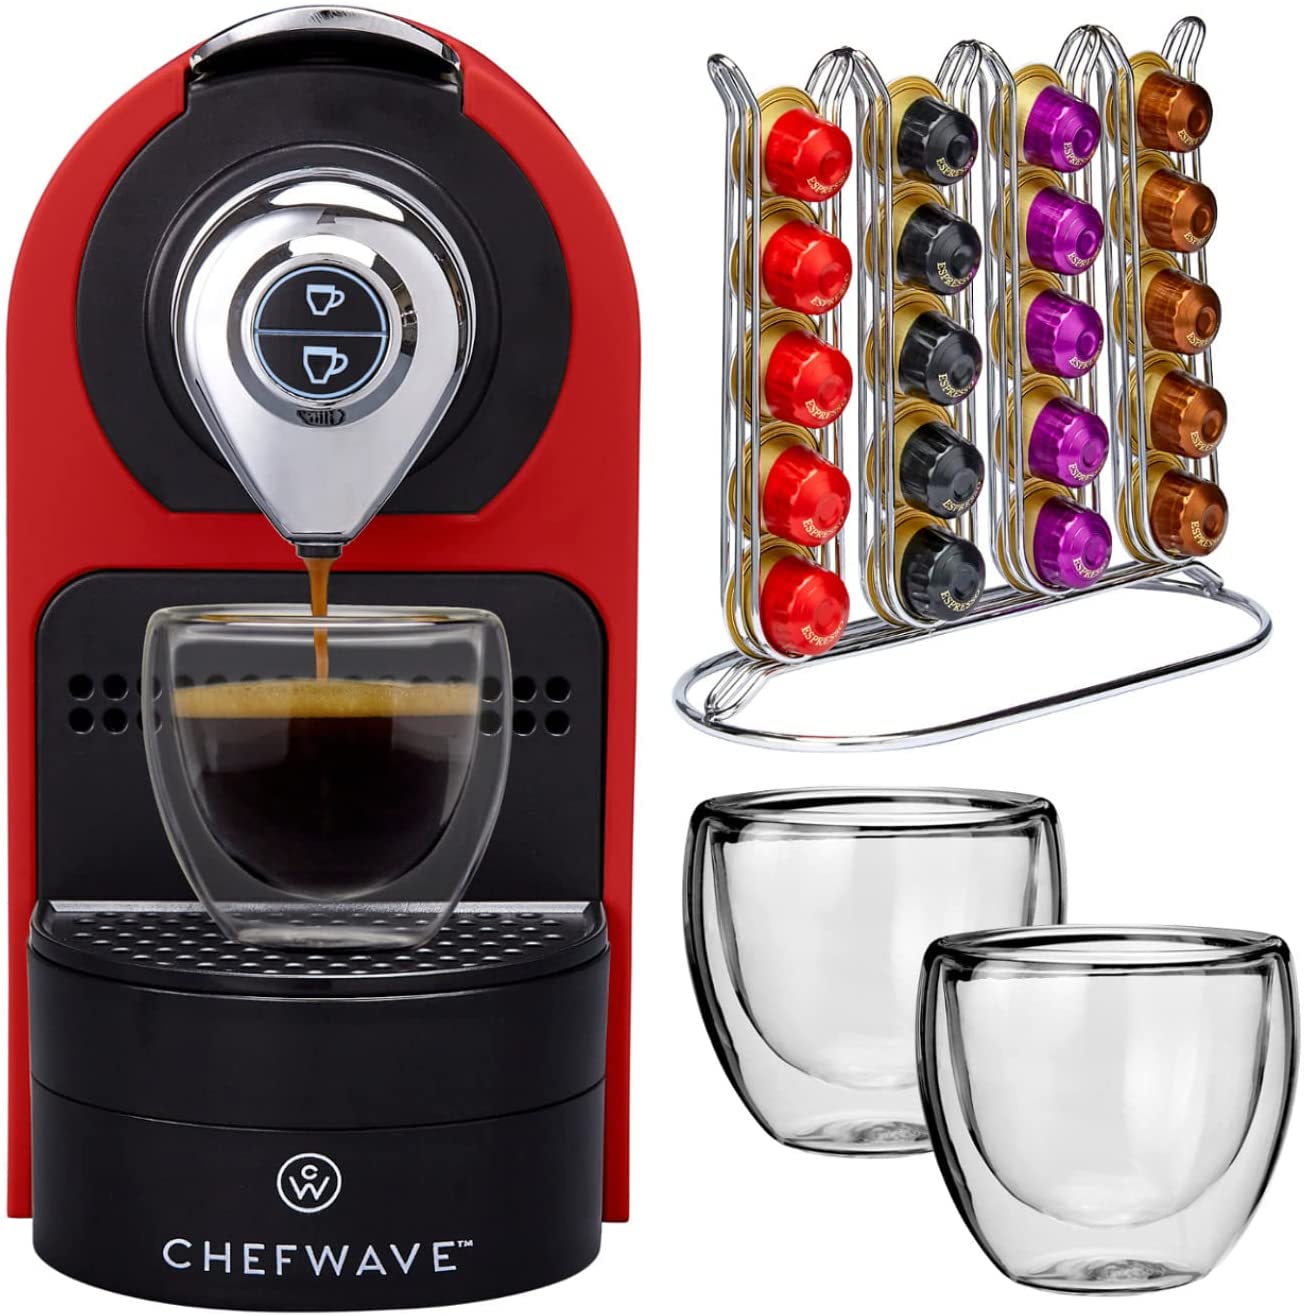 Chefwave Espresso Machine for Nespresso Compatible capsule Stainless Steel Automatic Programmable Espresso in the Espresso Machines department at Lowes.com